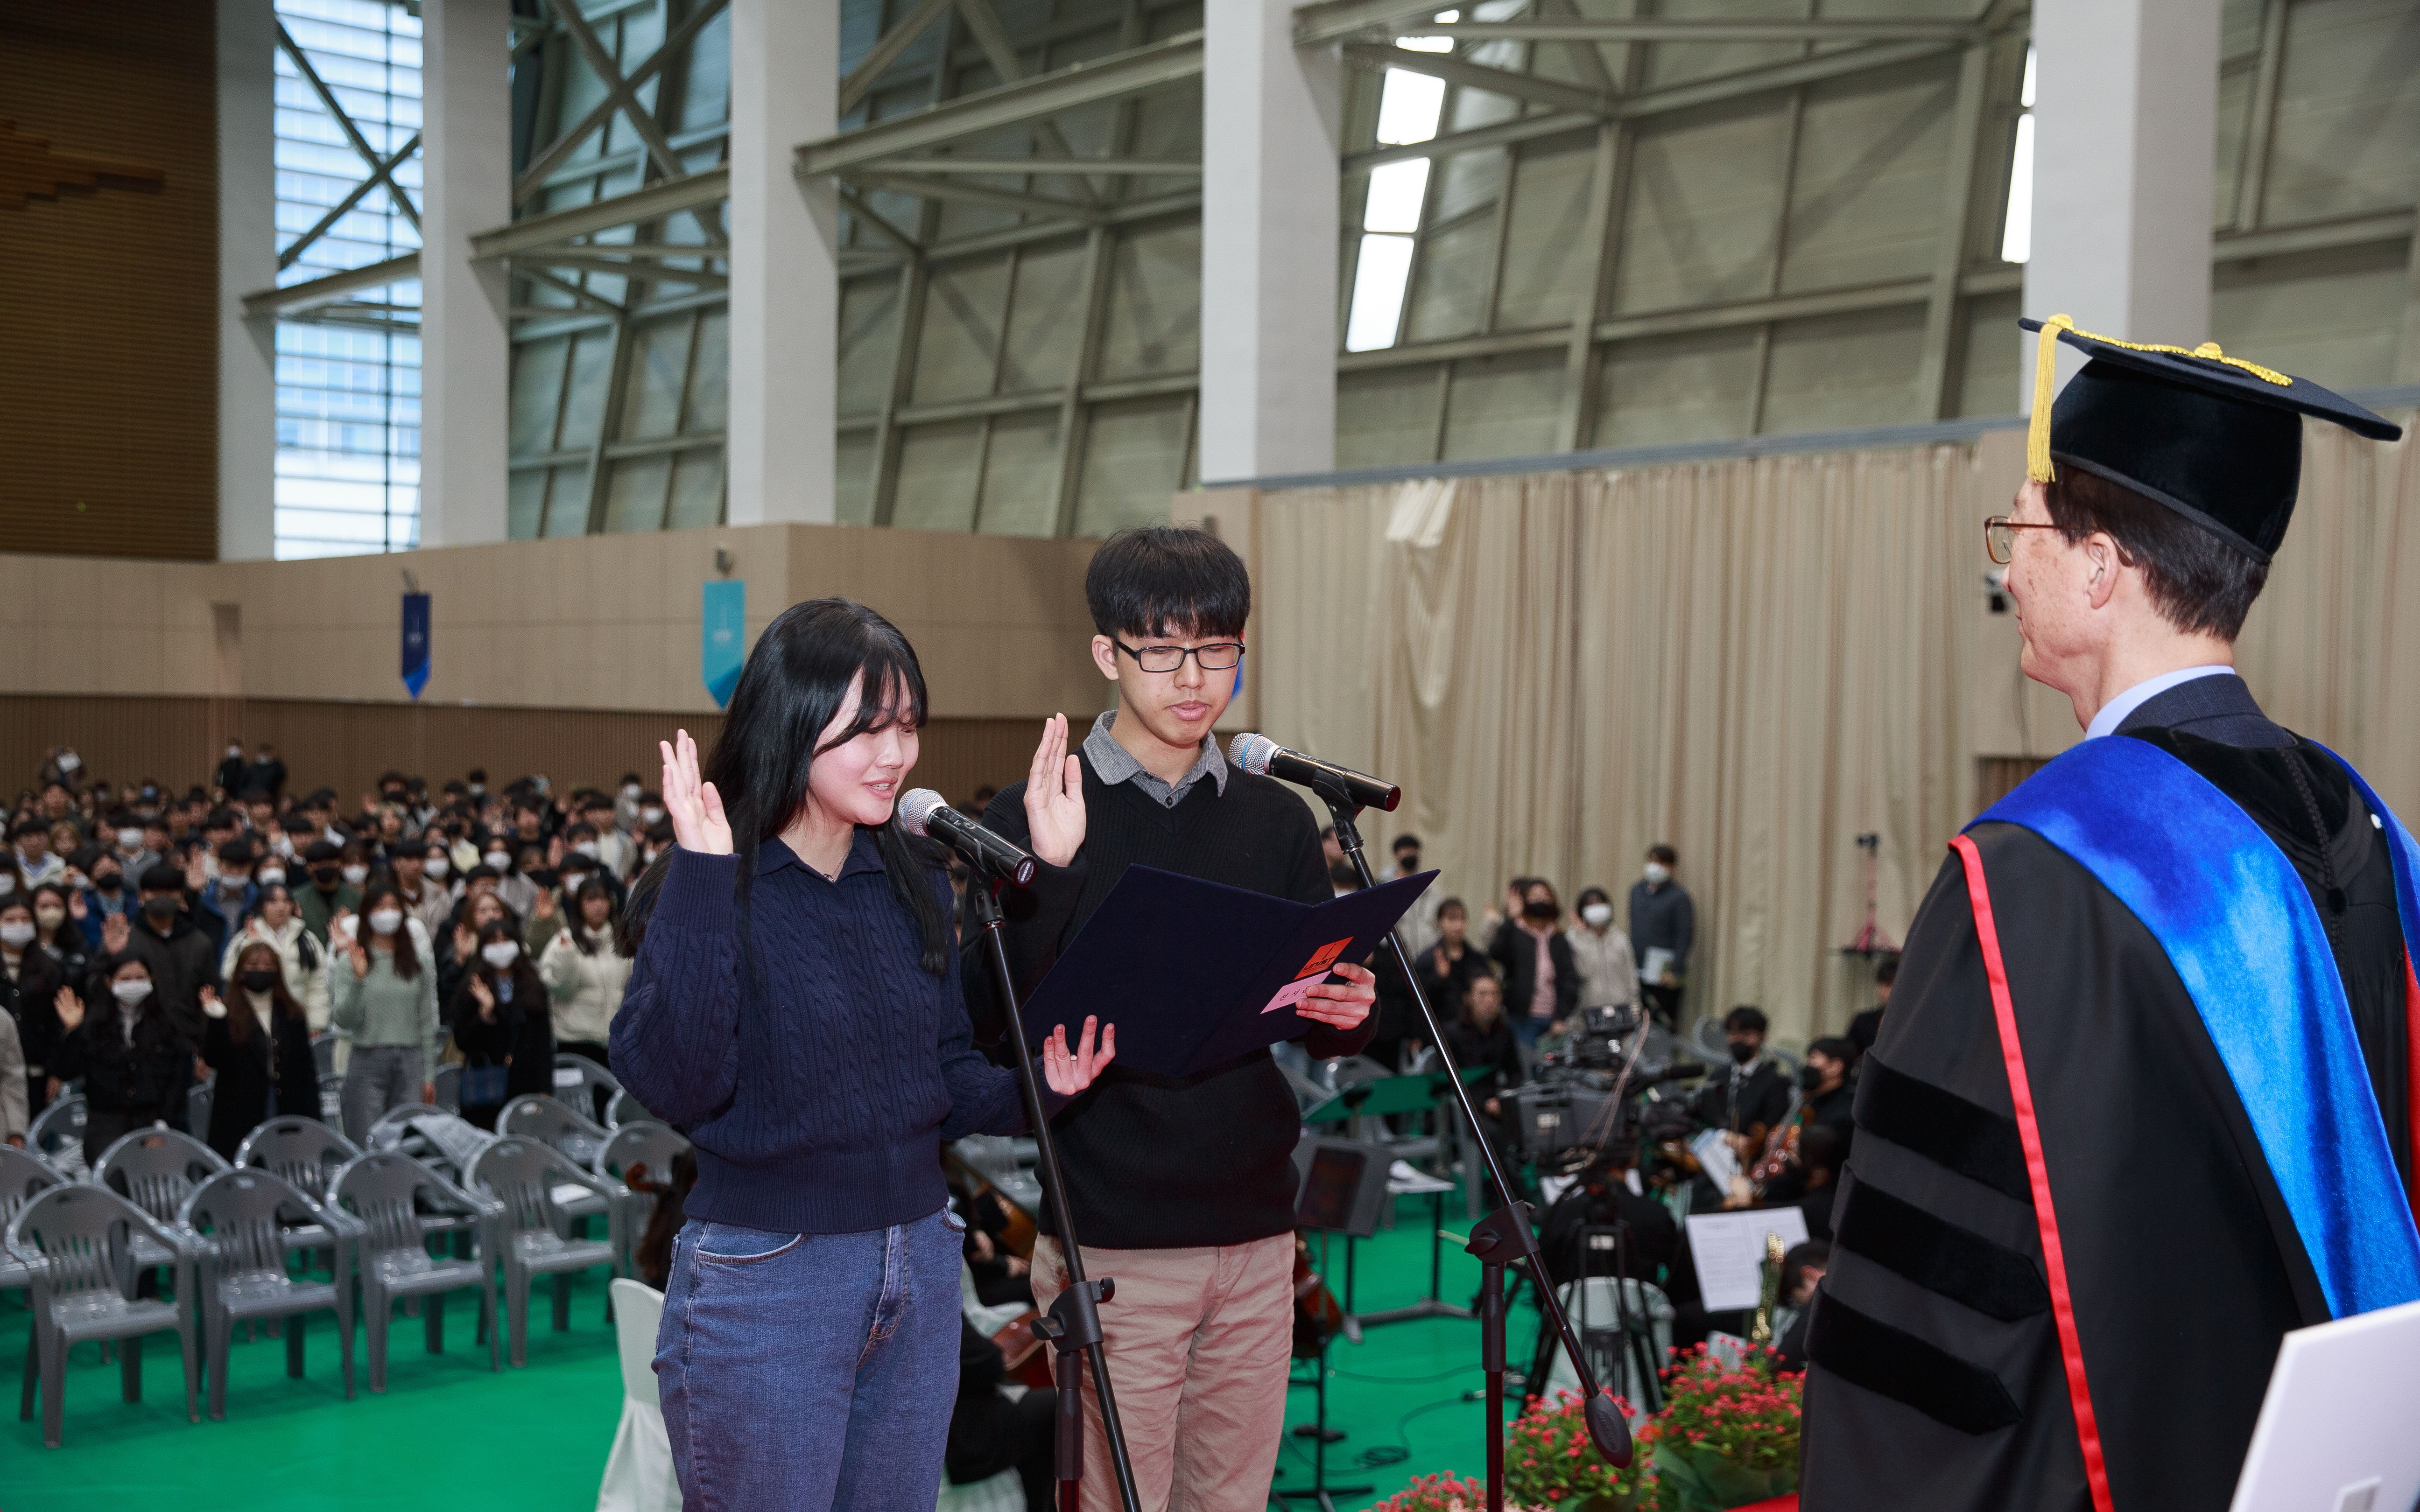 Student representatives, WonYoung Hong (left) and JunHyuk Park (right), delievering the Oath of Freshmen at the 2023 UNIST Matriculation Ceremony.